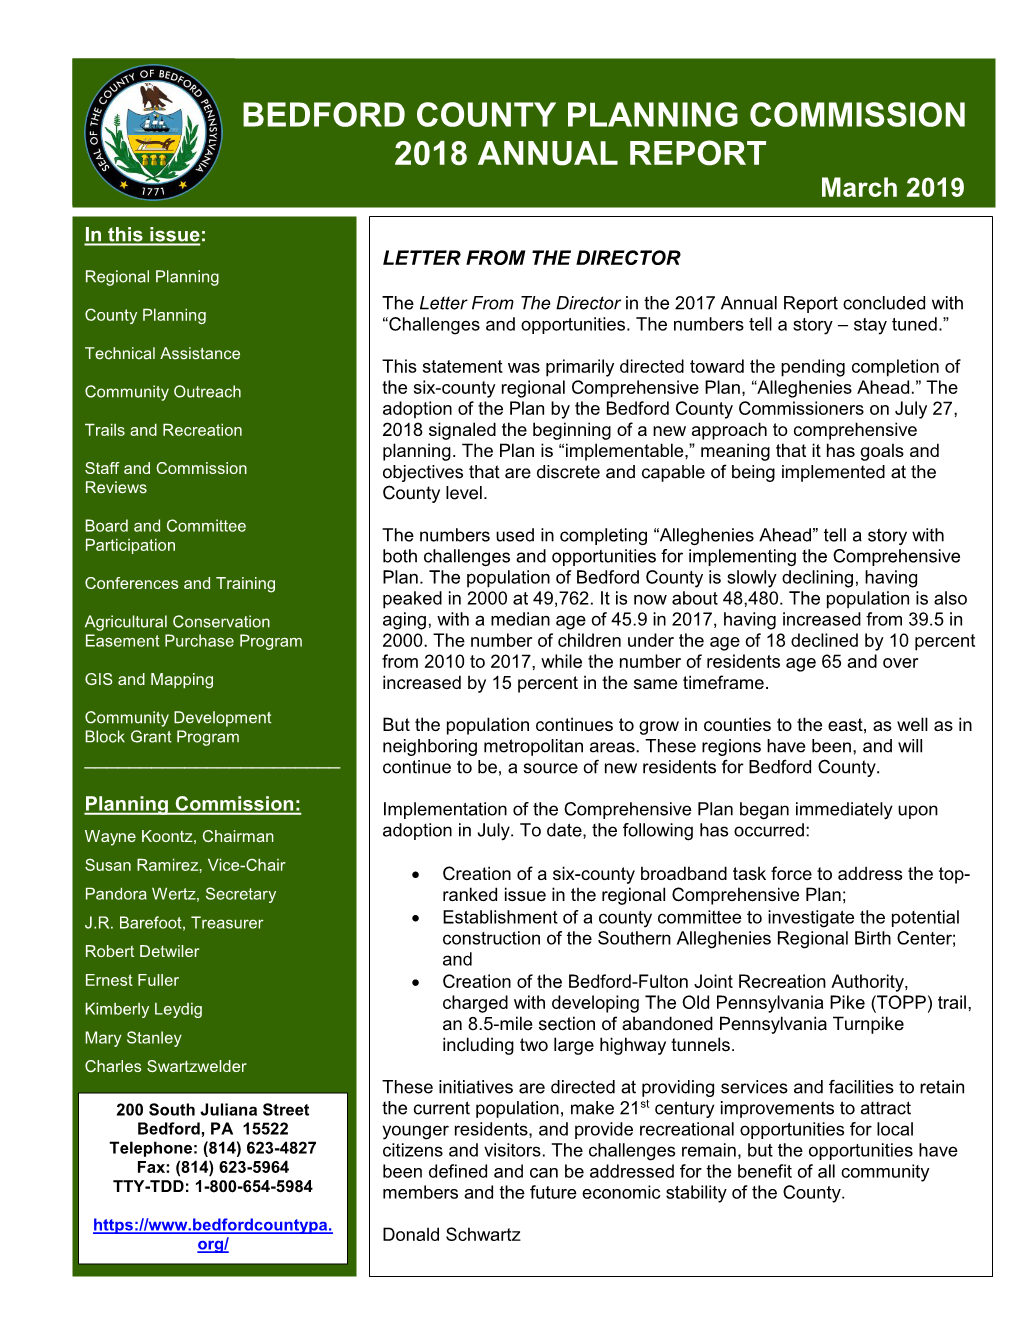 BEDFORD COUNTY PLANNING COMMISSION 2018 ANNUAL REPORT March 2019